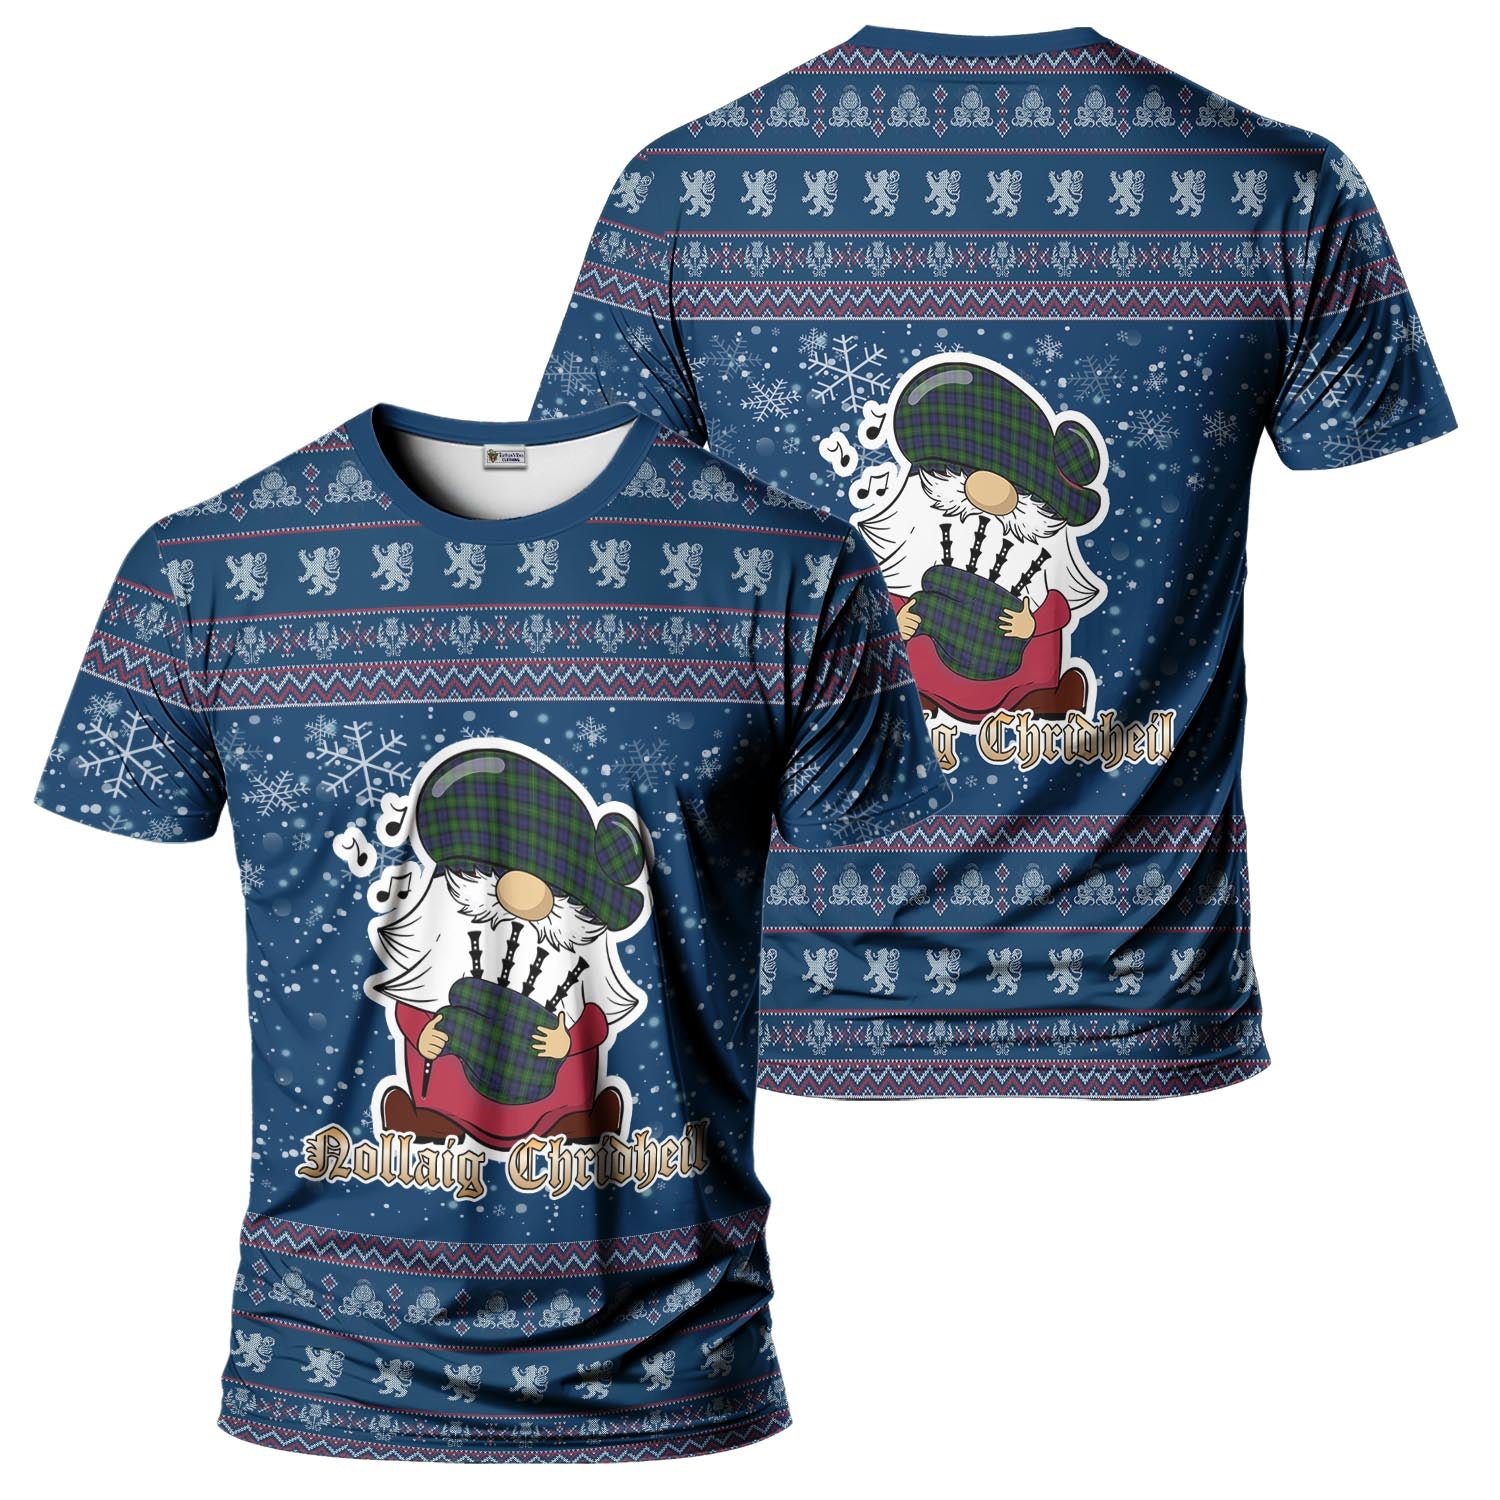 Gordon Clan Christmas Family T-Shirt with Funny Gnome Playing Bagpipes Kid's Shirt Blue - Tartanvibesclothing